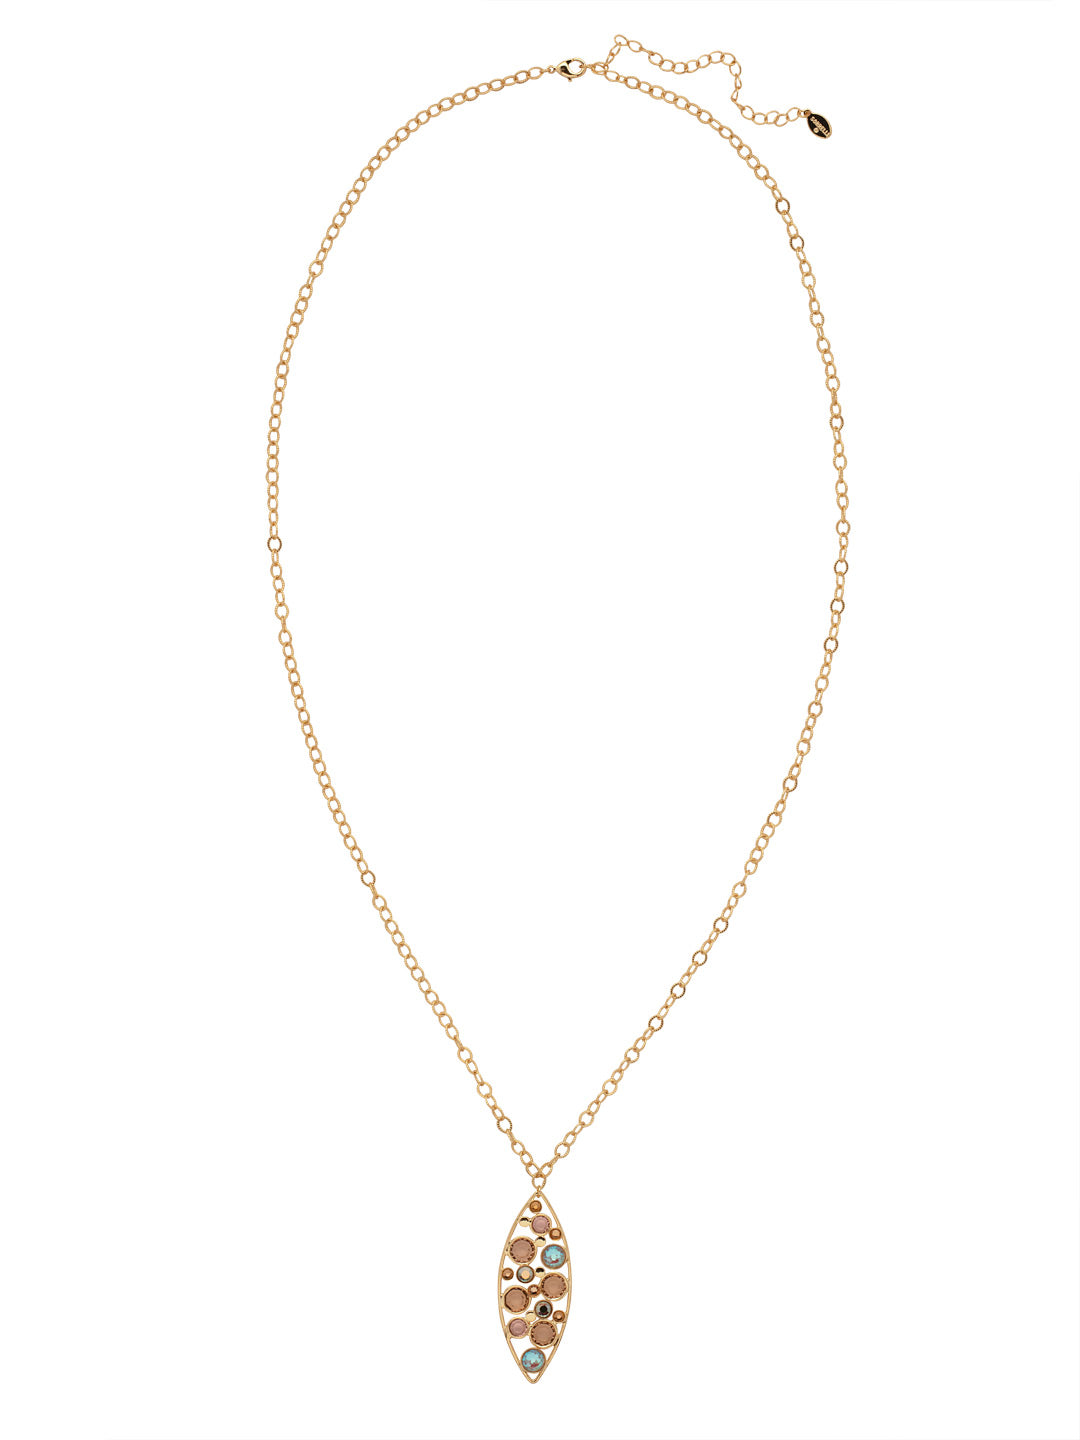 Charlene Pendant Necklace - NFC53BGRSU - <p>The Charlene Pendant Necklace features a single crystal channel filled oblong hoop on an adjustable long chain, secured with a lobster claw clasp. From Sorrelli's Raw Sugar collection in our Bright Gold-tone finish.</p>